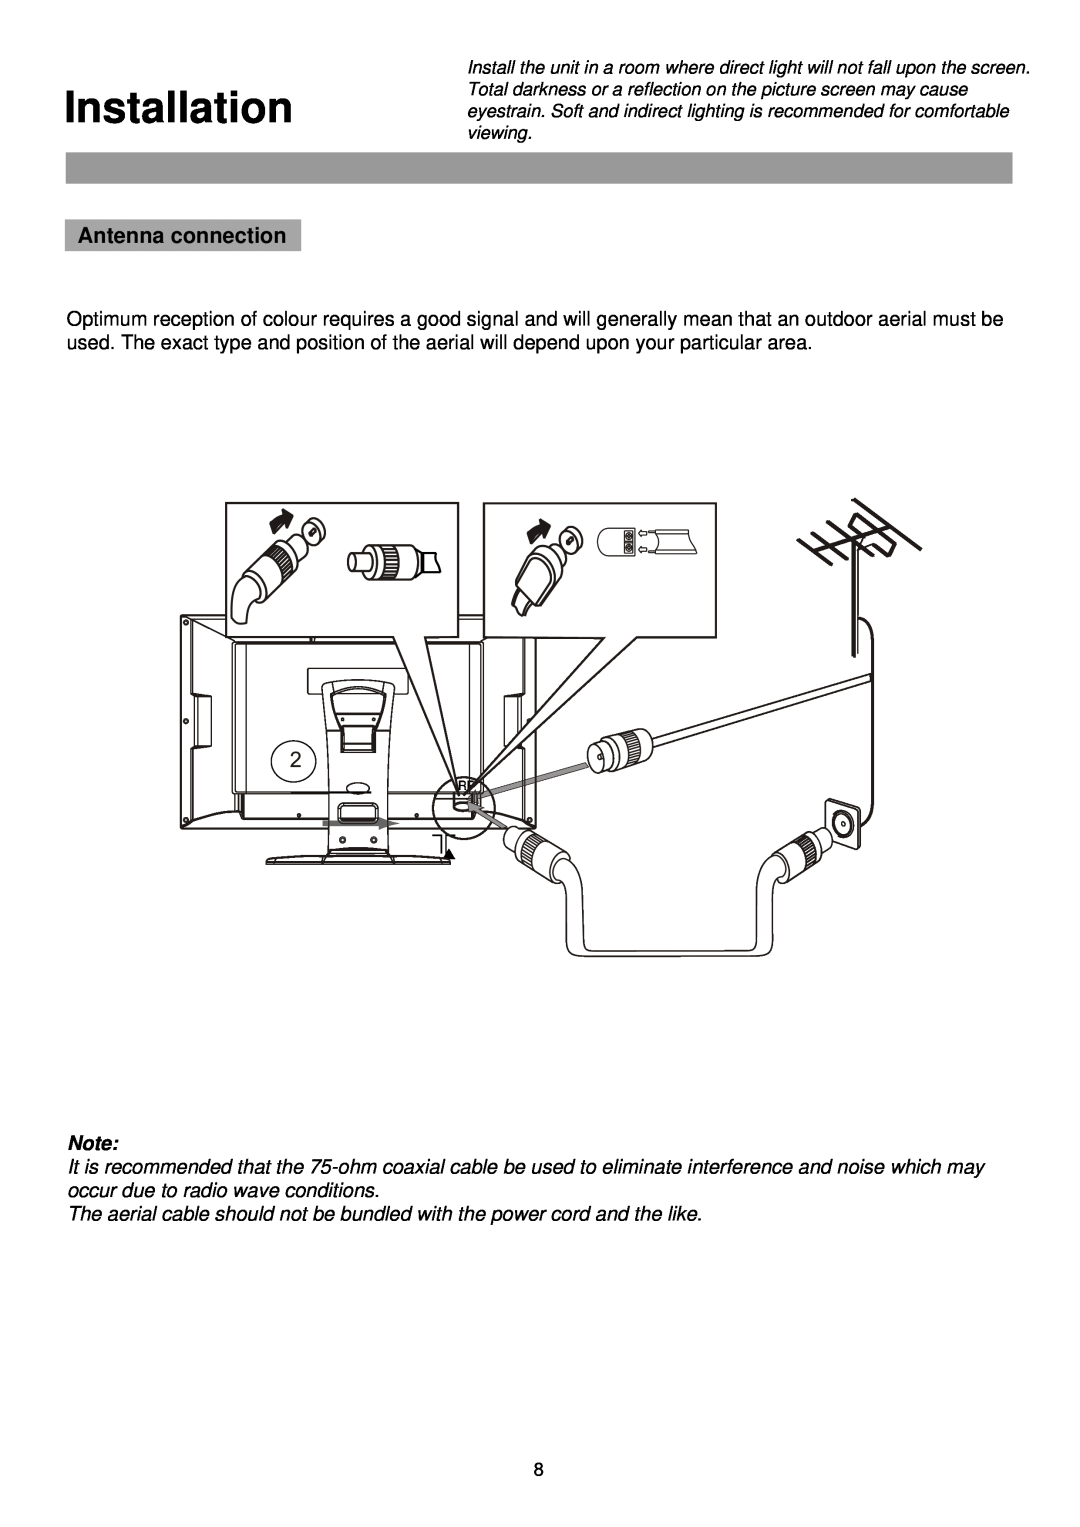 Palsonic TFTV515 owner manual Installation, Antenna connection 